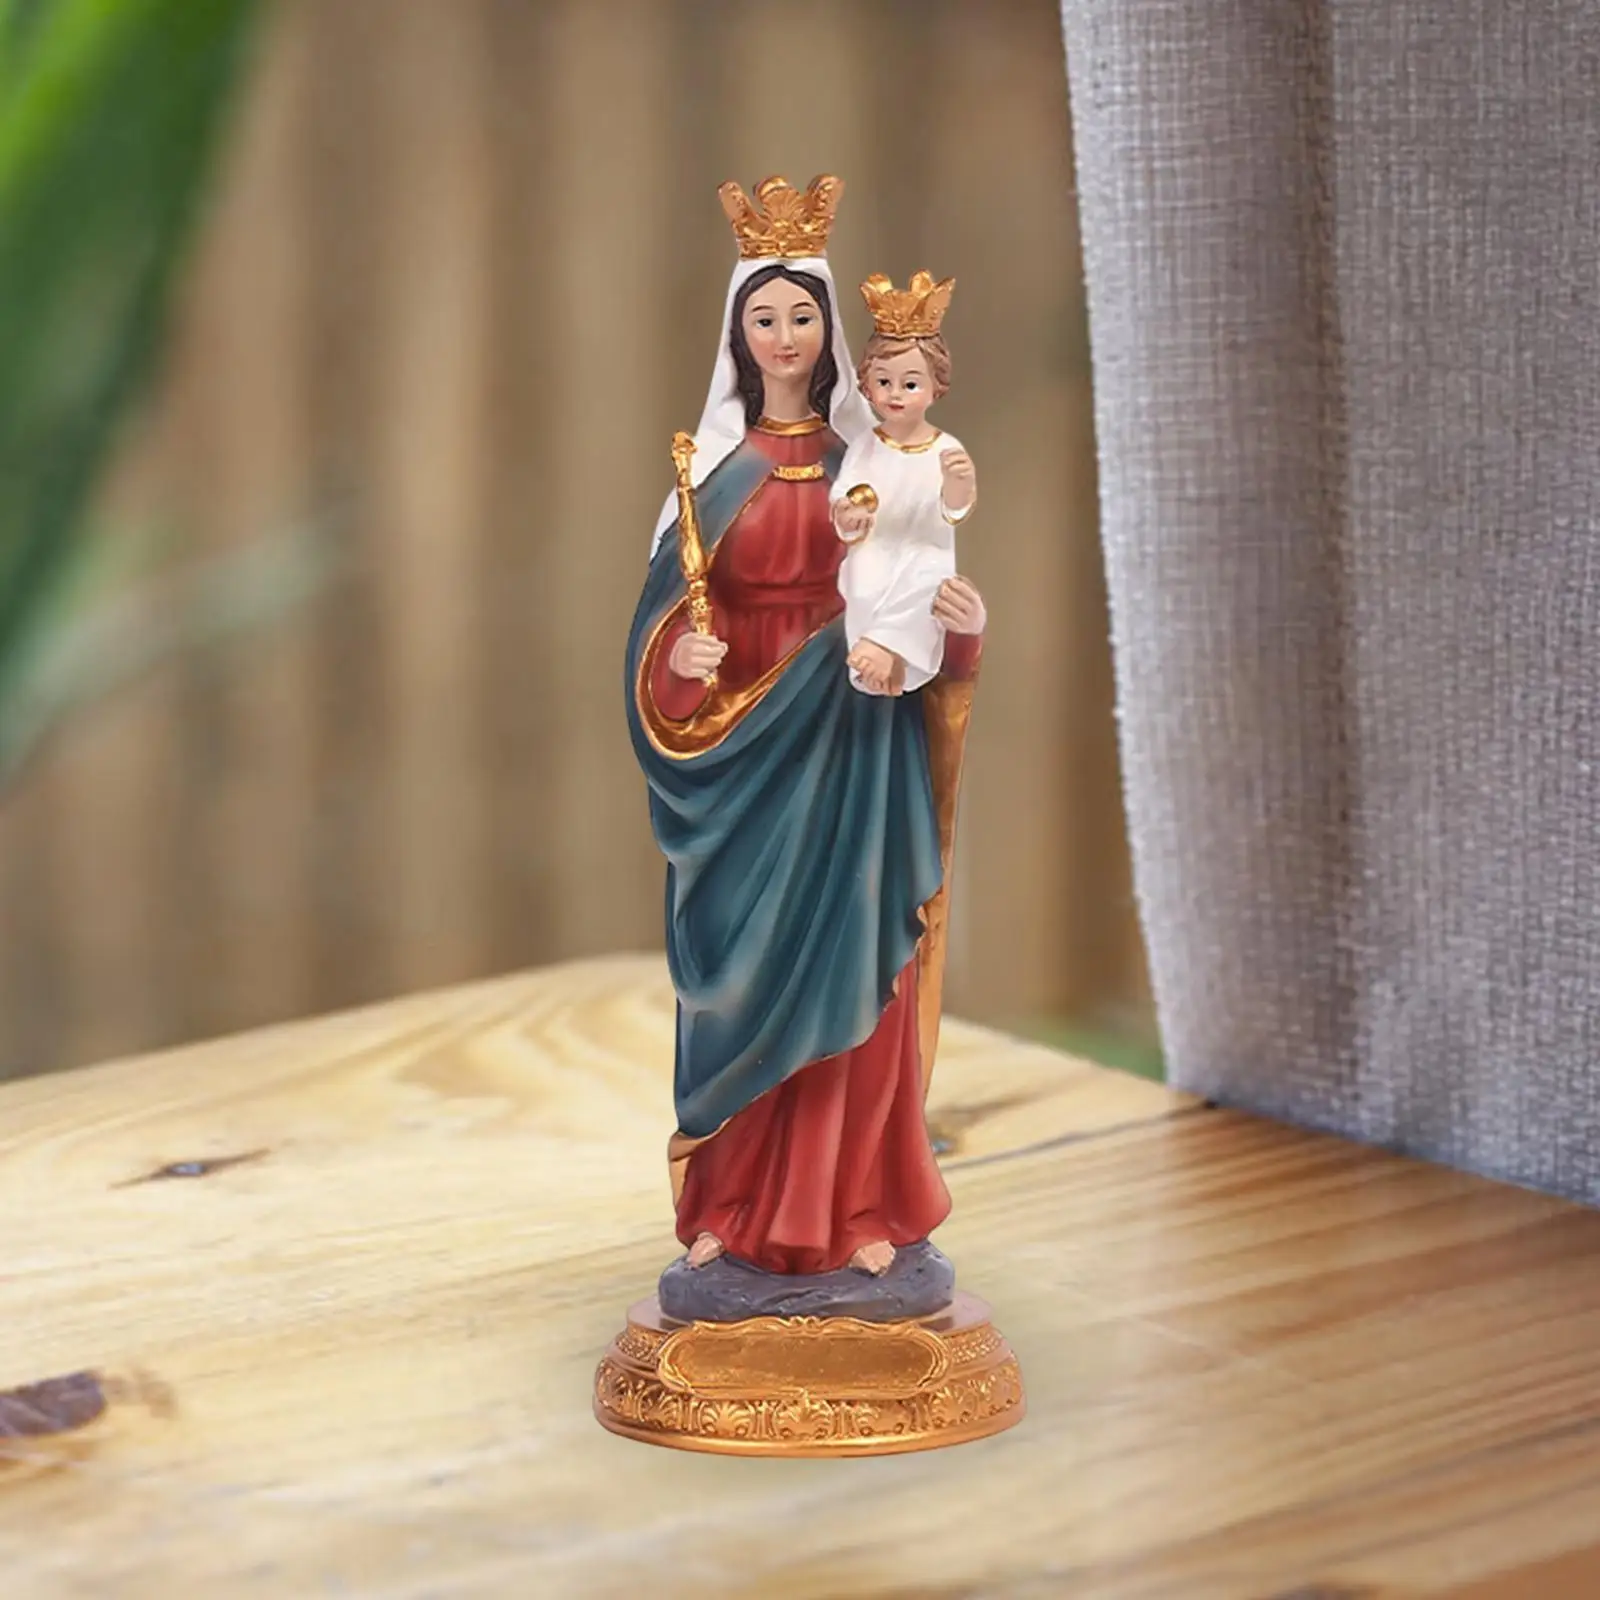 

Resin Figurines Jesus Sculpture Catholic Collectible Christian Virgin Mary Statue for Decors Living Room Tabletop Home Xmas